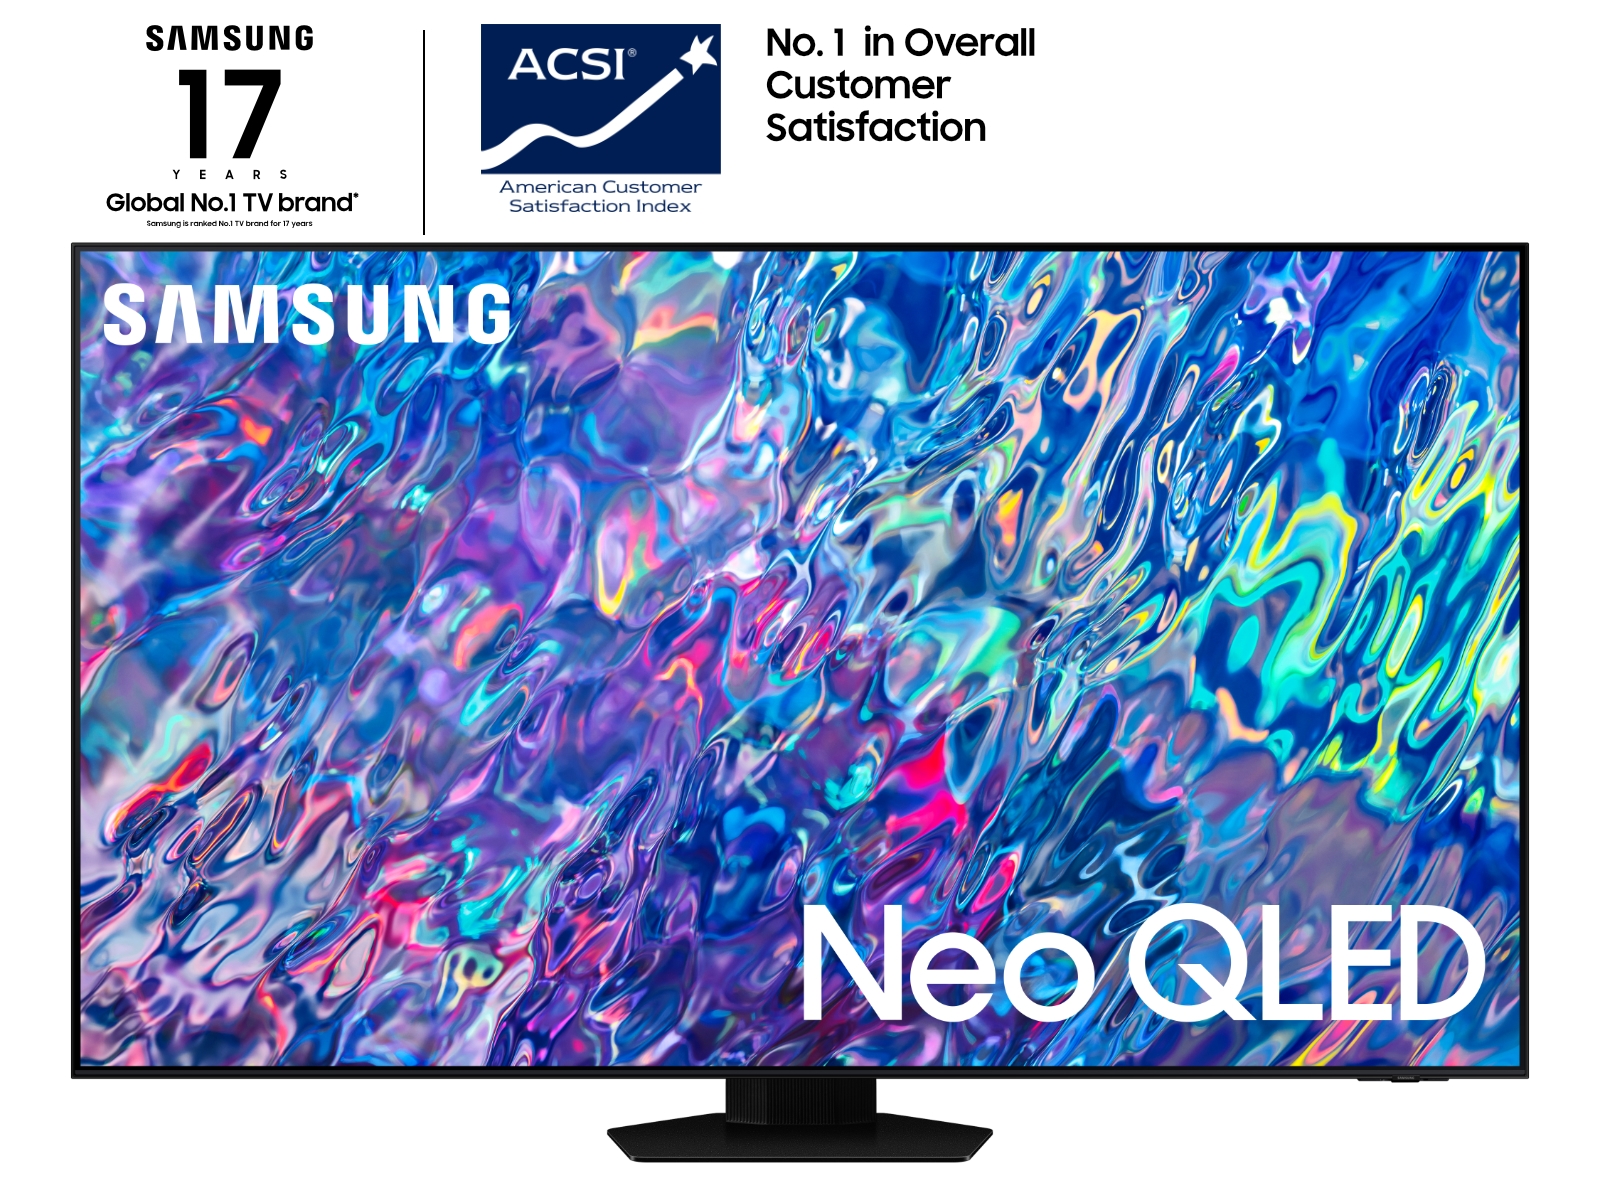 Samsung Neo QLED 8K, Neo QLED Premium TV Models Launched in India: Price,  Specifications